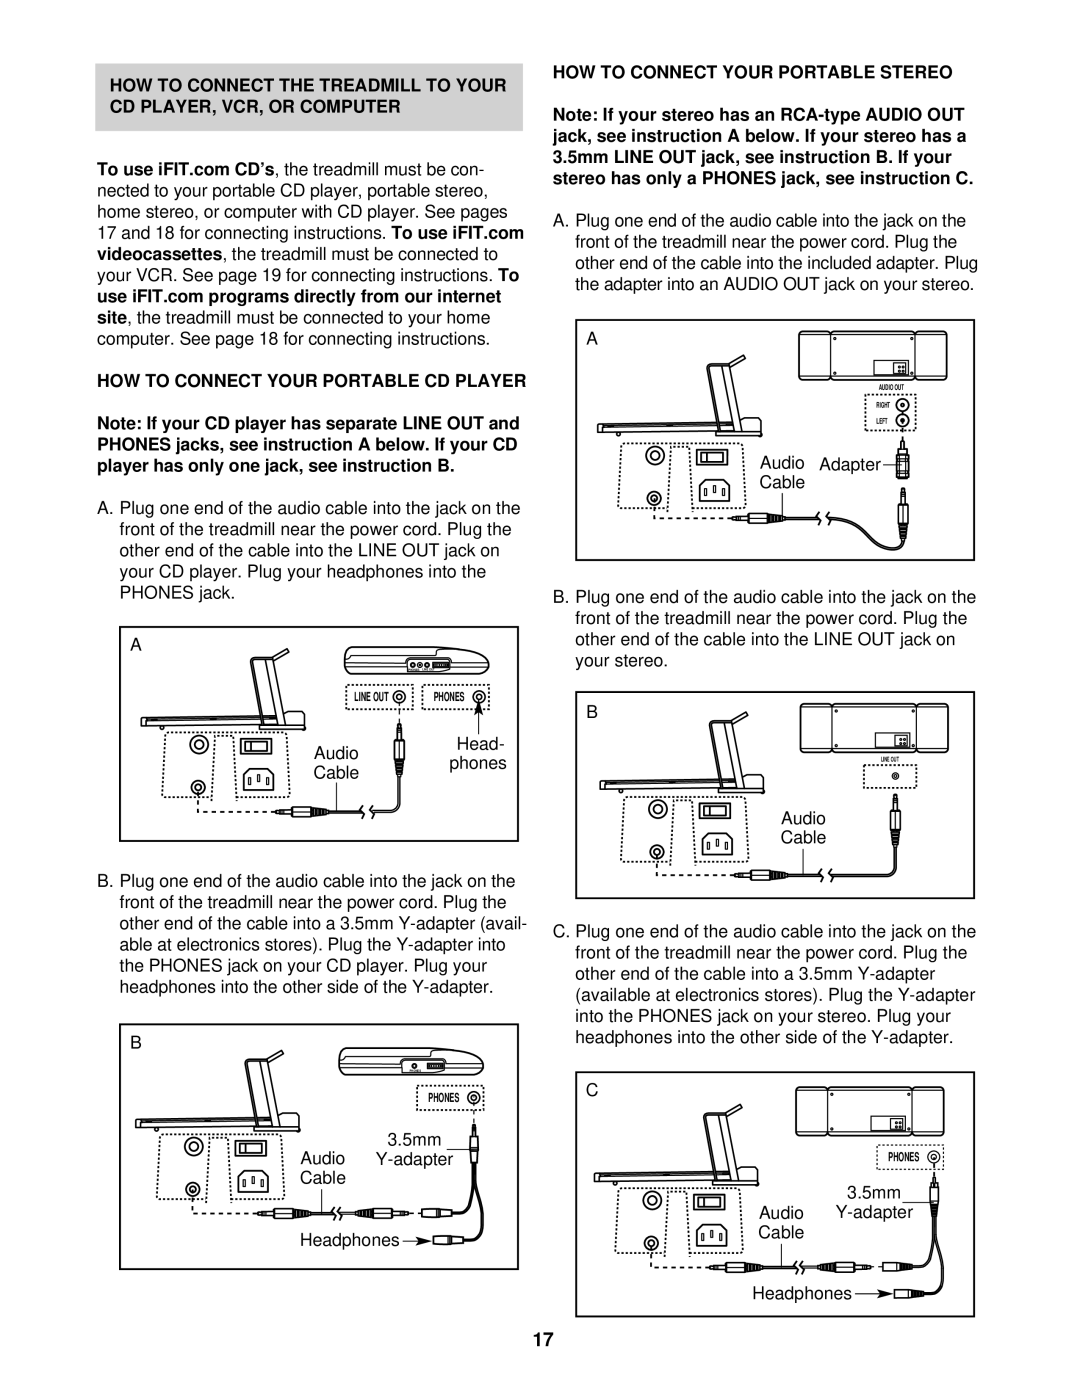 ProForm PFTL69711 user manual HOW to Connect Your Portable Stereo 